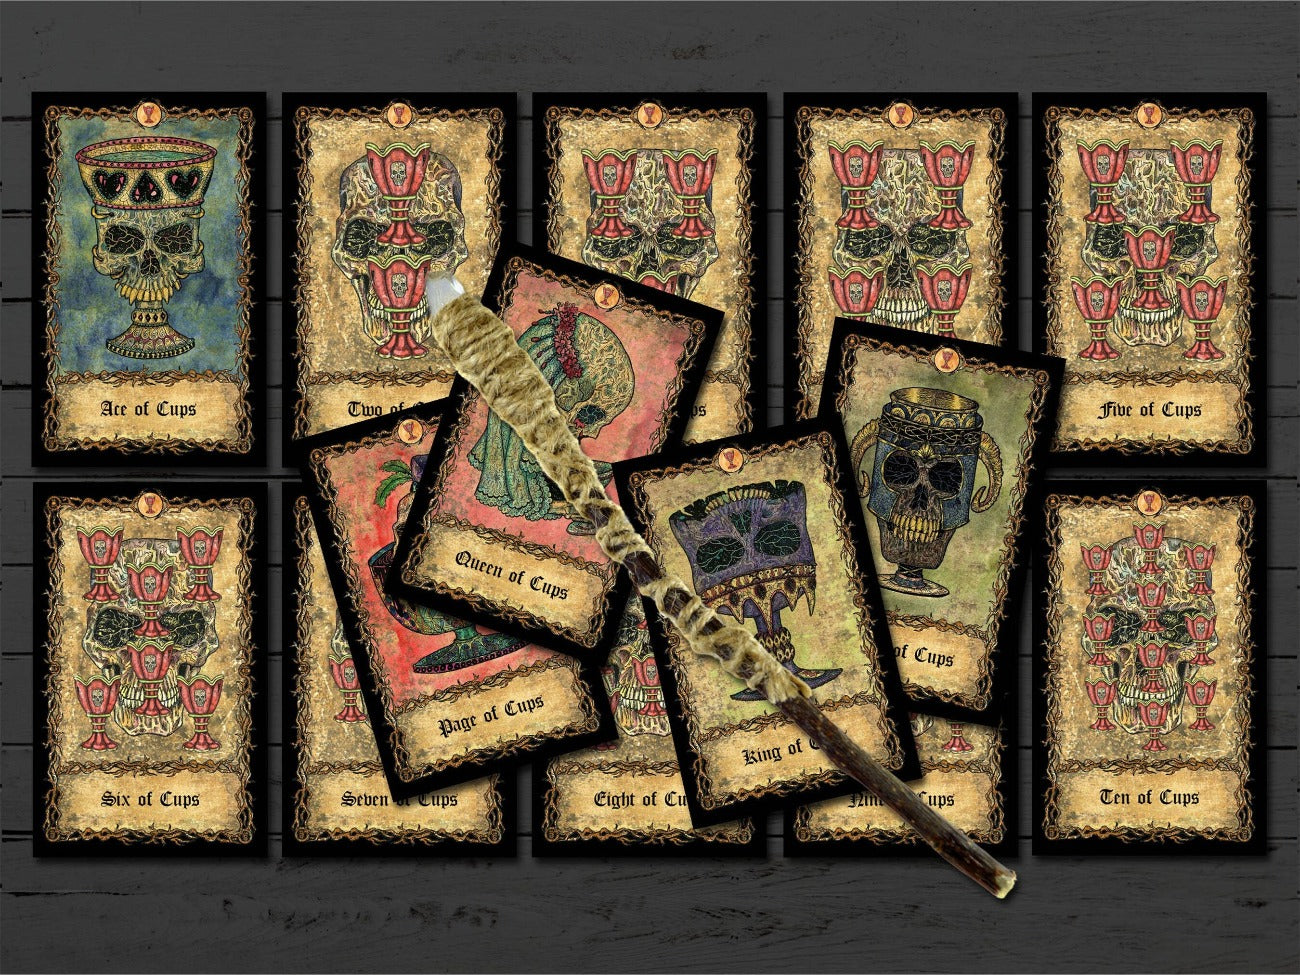 The 14 cards of the suit of Cups from Ace to King.